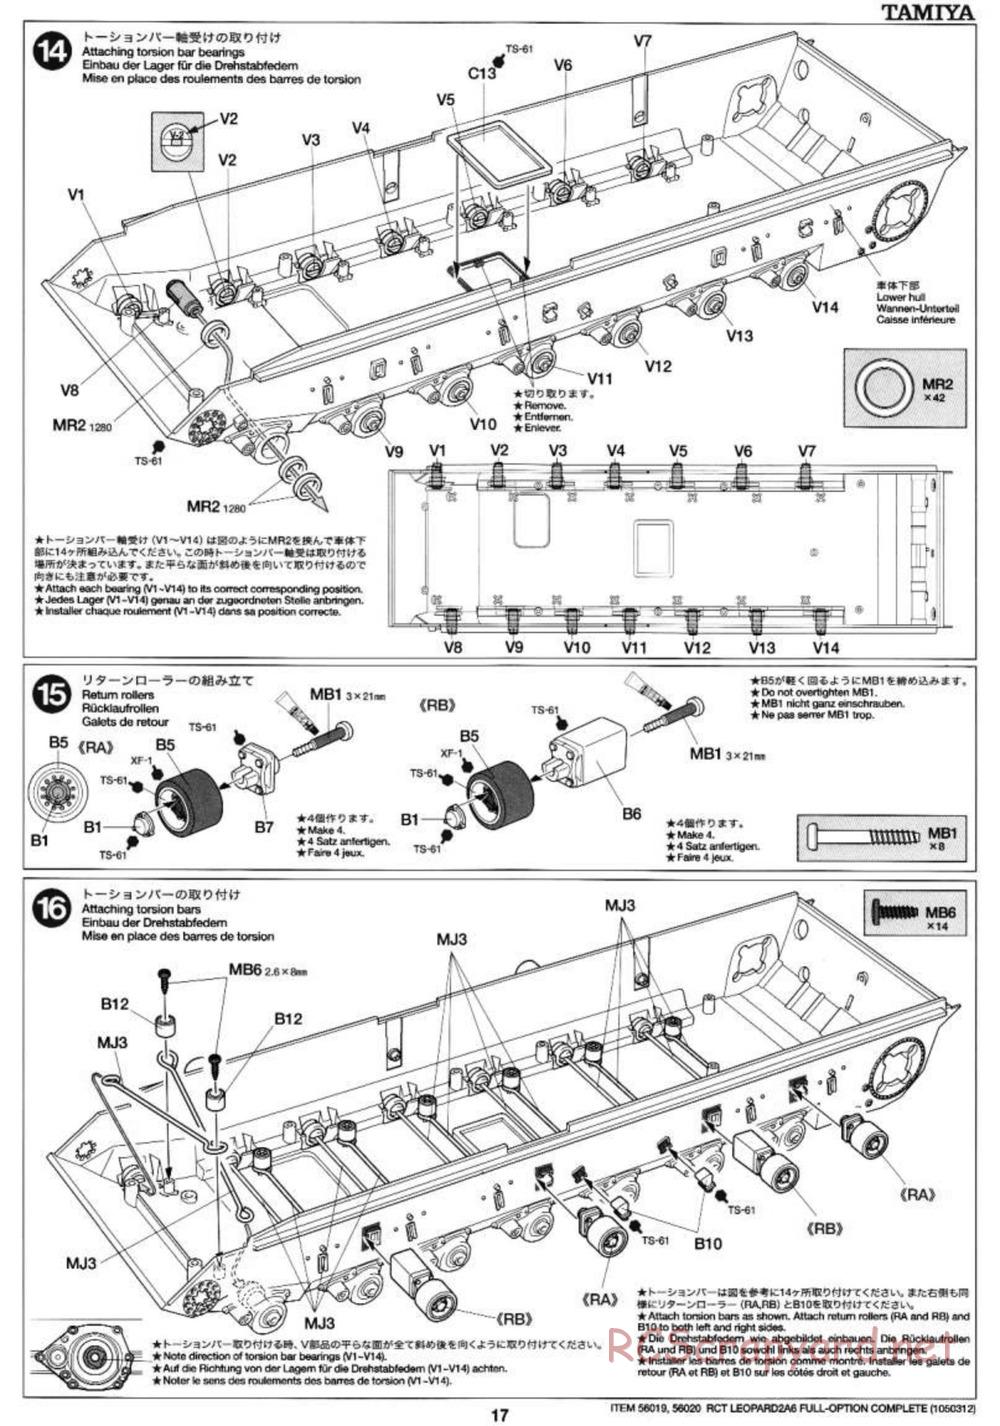 Tamiya - Leopard 2 A6 - 1/16 Scale Chassis - Manual - Page 17